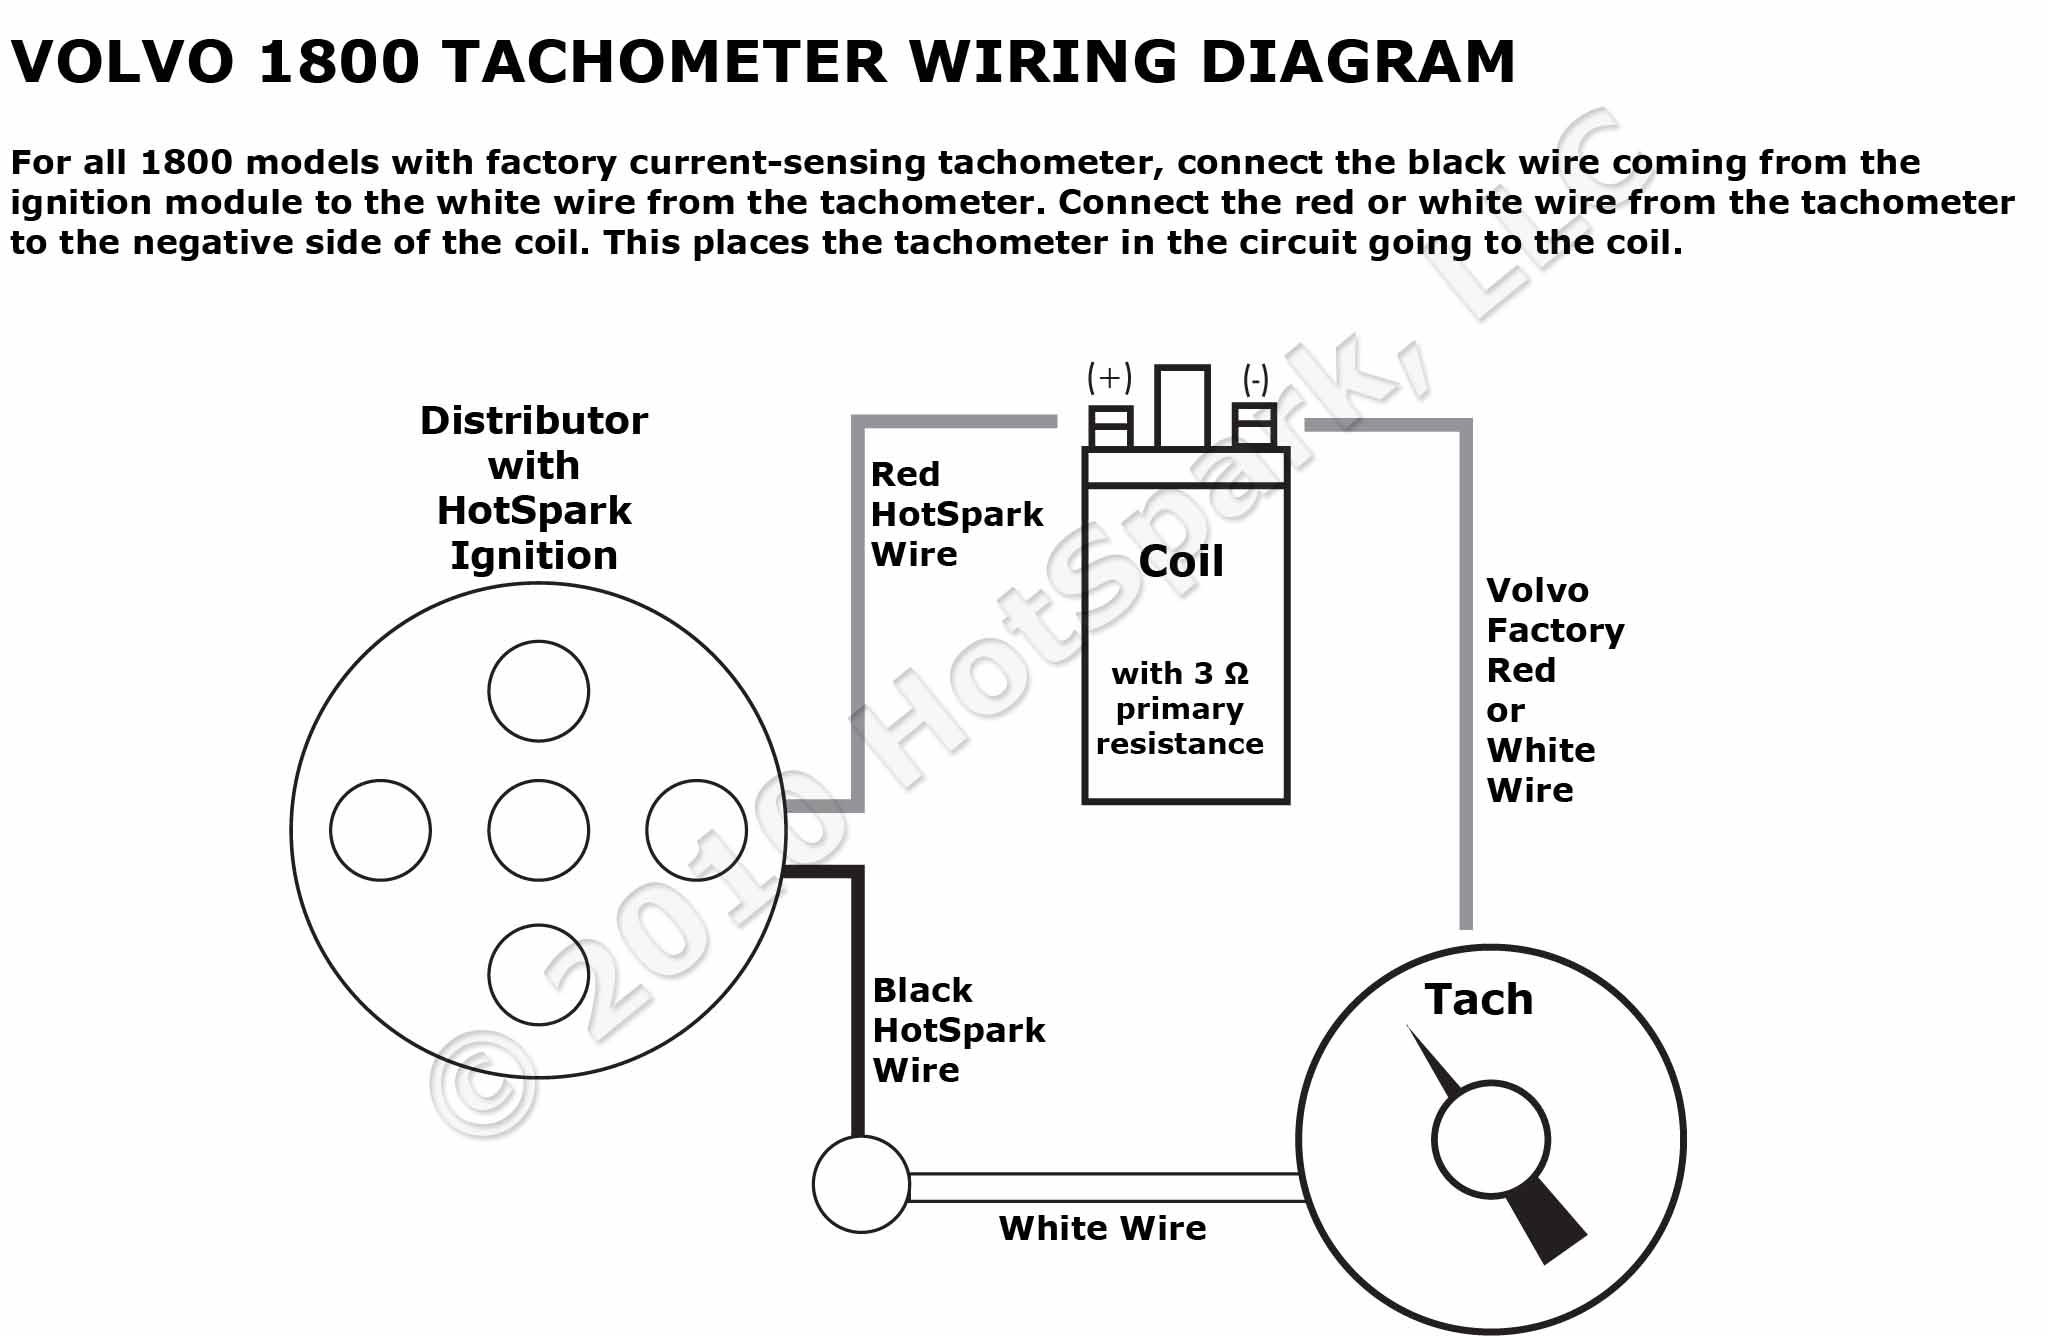 Volvo 1800 Tachometer Wiring Diagram with HotSpark Ignition Electronic  Ignition Conversion Kit VDO Speedometer Sensor Wiring Hot Spark